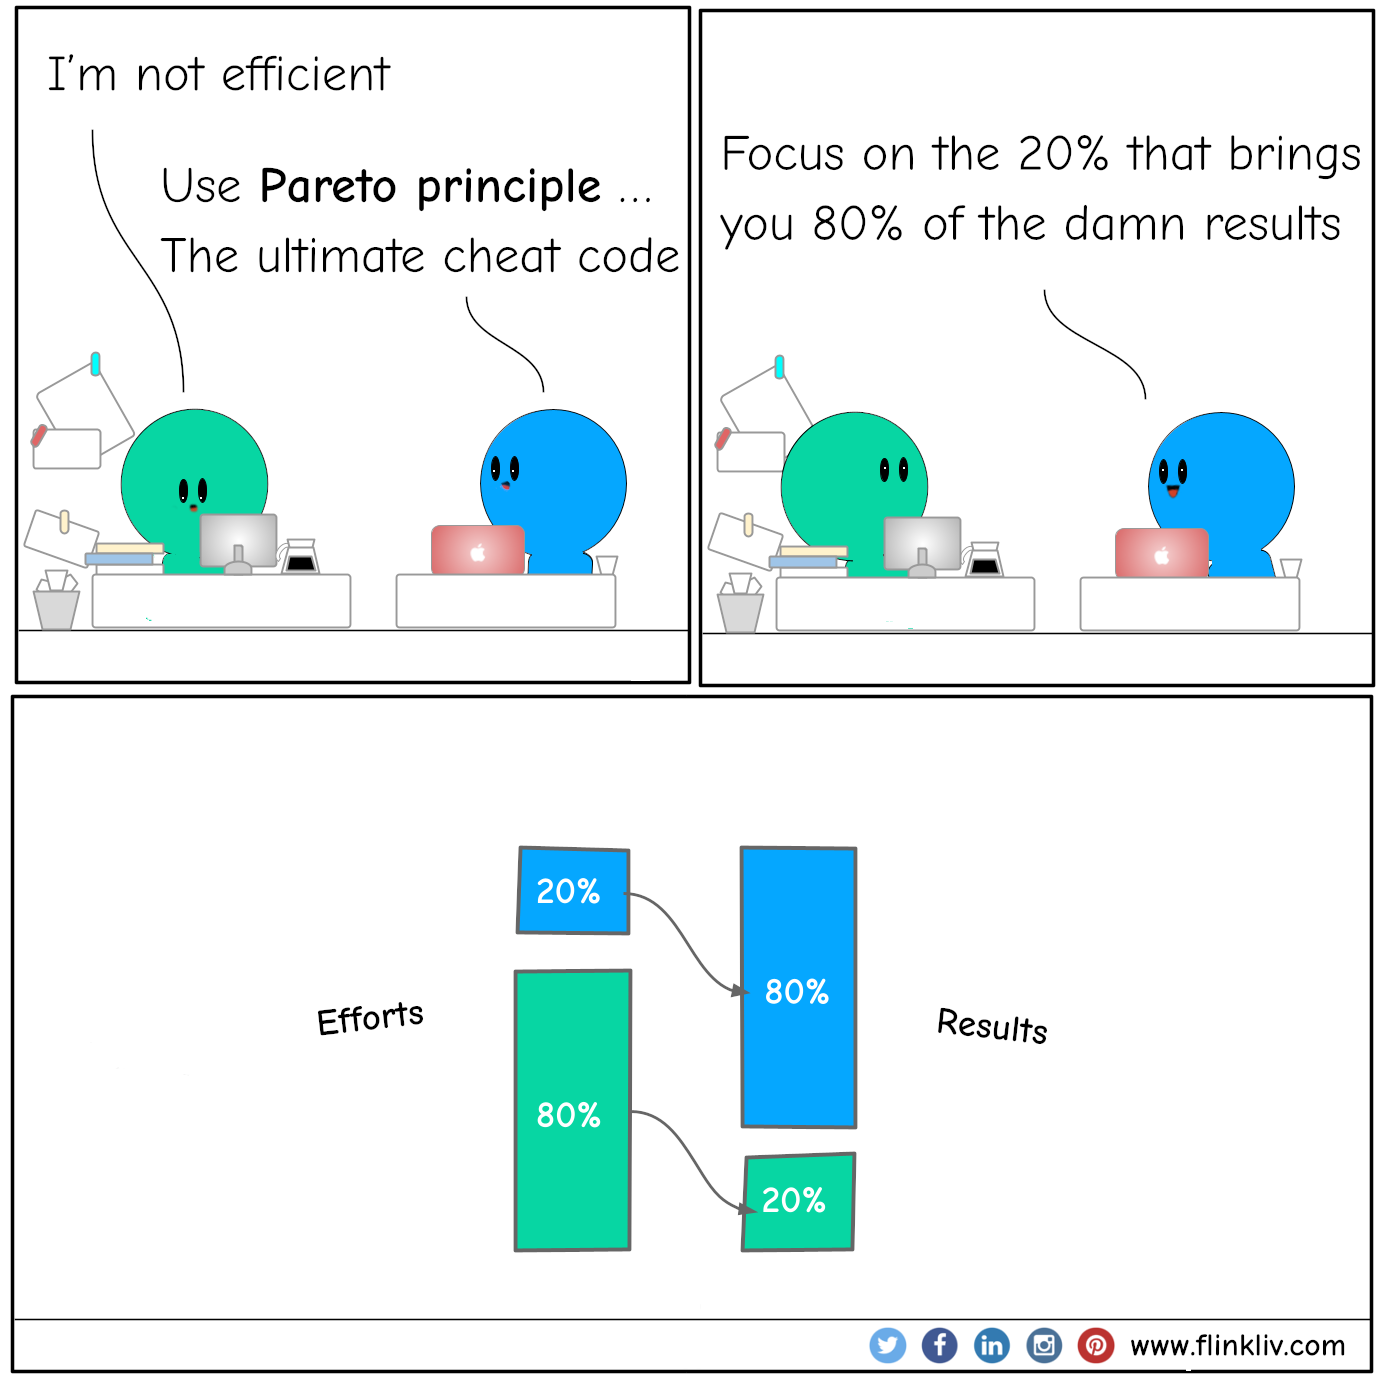 Conversation between A and B about Pareto Principle.
				A: I’m not efficient
				B: Use Pareto Principle 
				B: The ultimate cheat code.
				B: Focus on the 20% that brings you 80% of the damn results. 
				